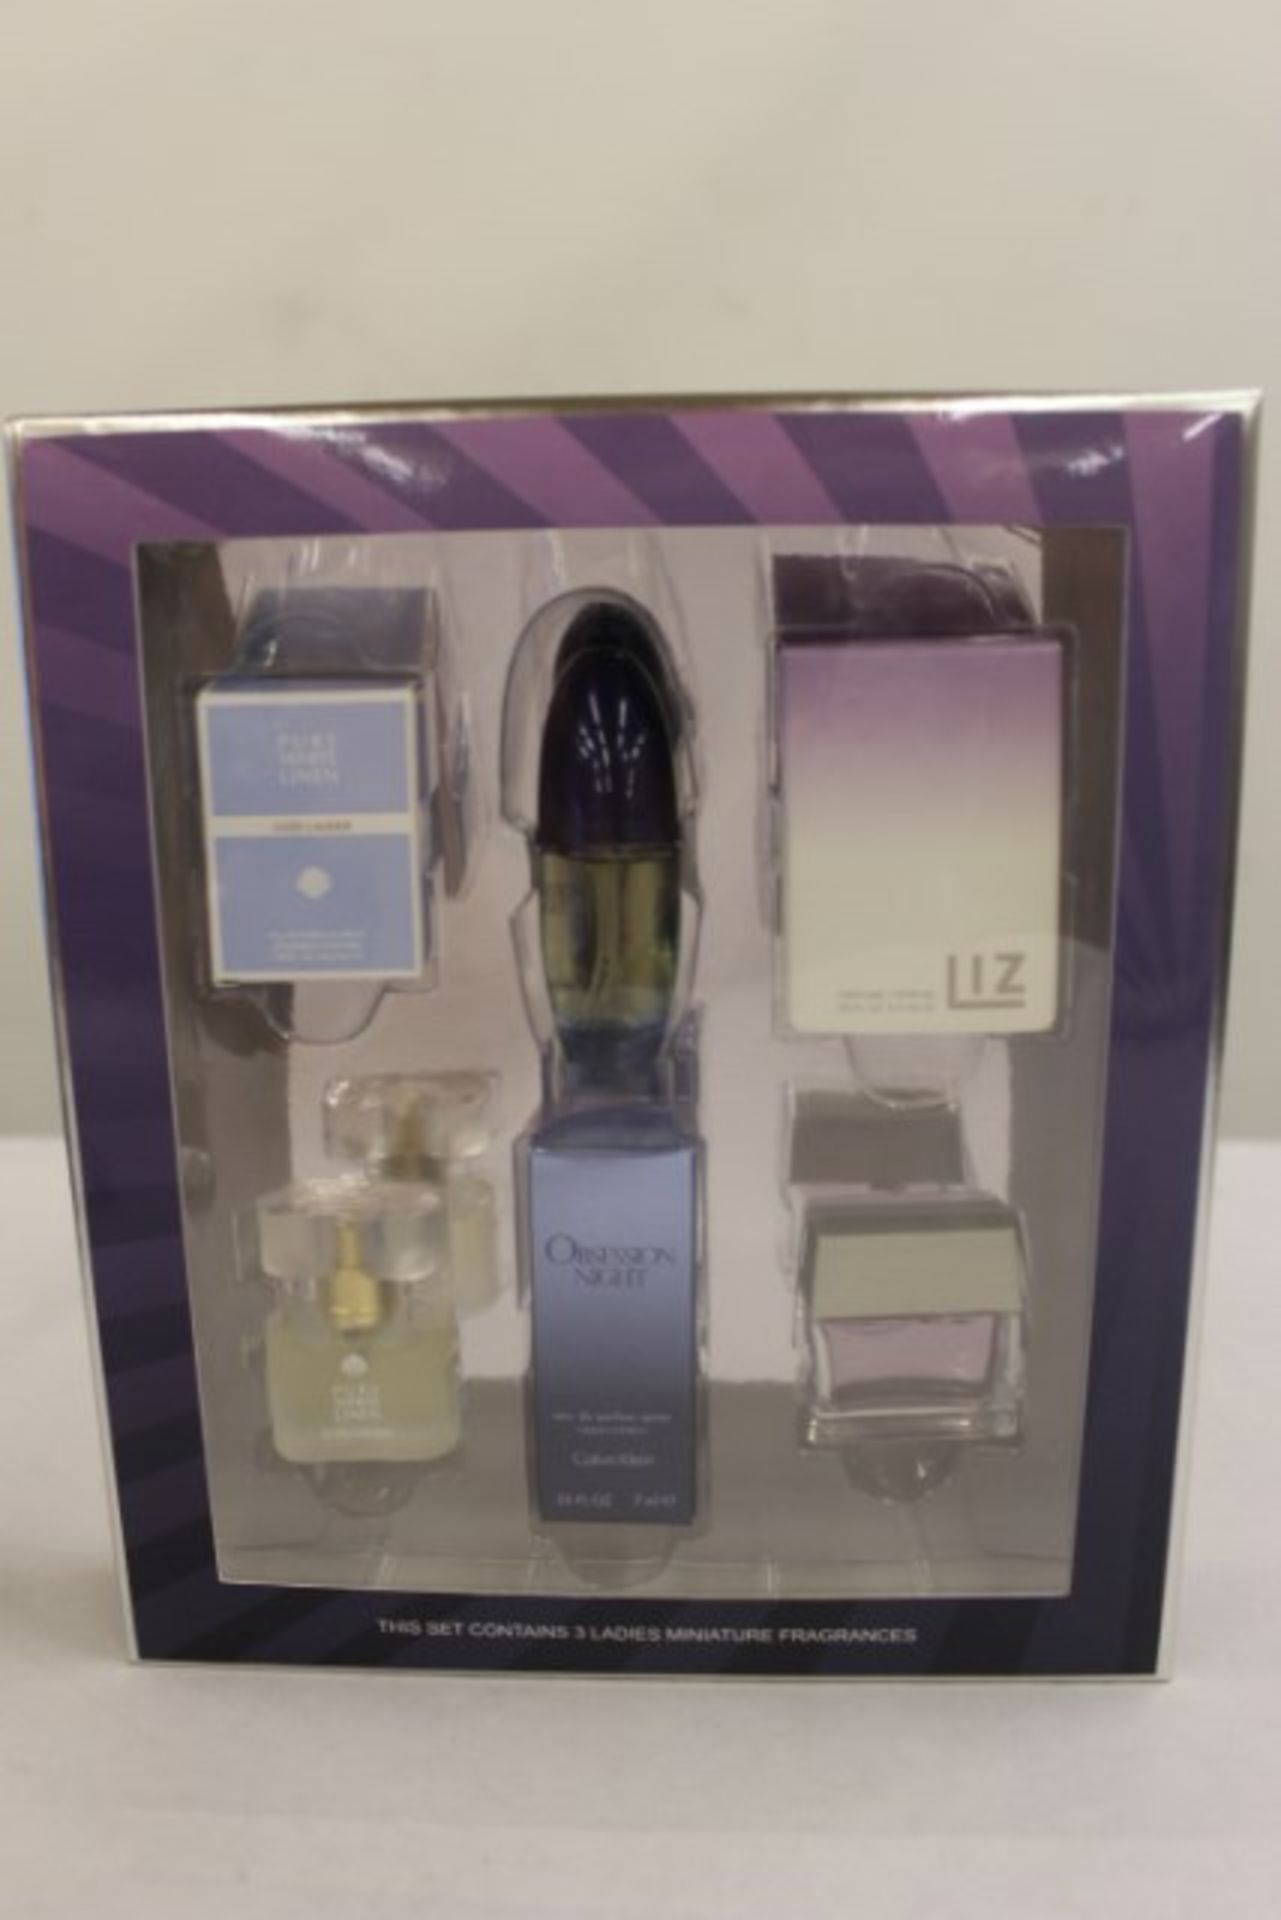 V Brand New Ladies Fragrance Collection including Pure White Linen, Obsession Night and Liz